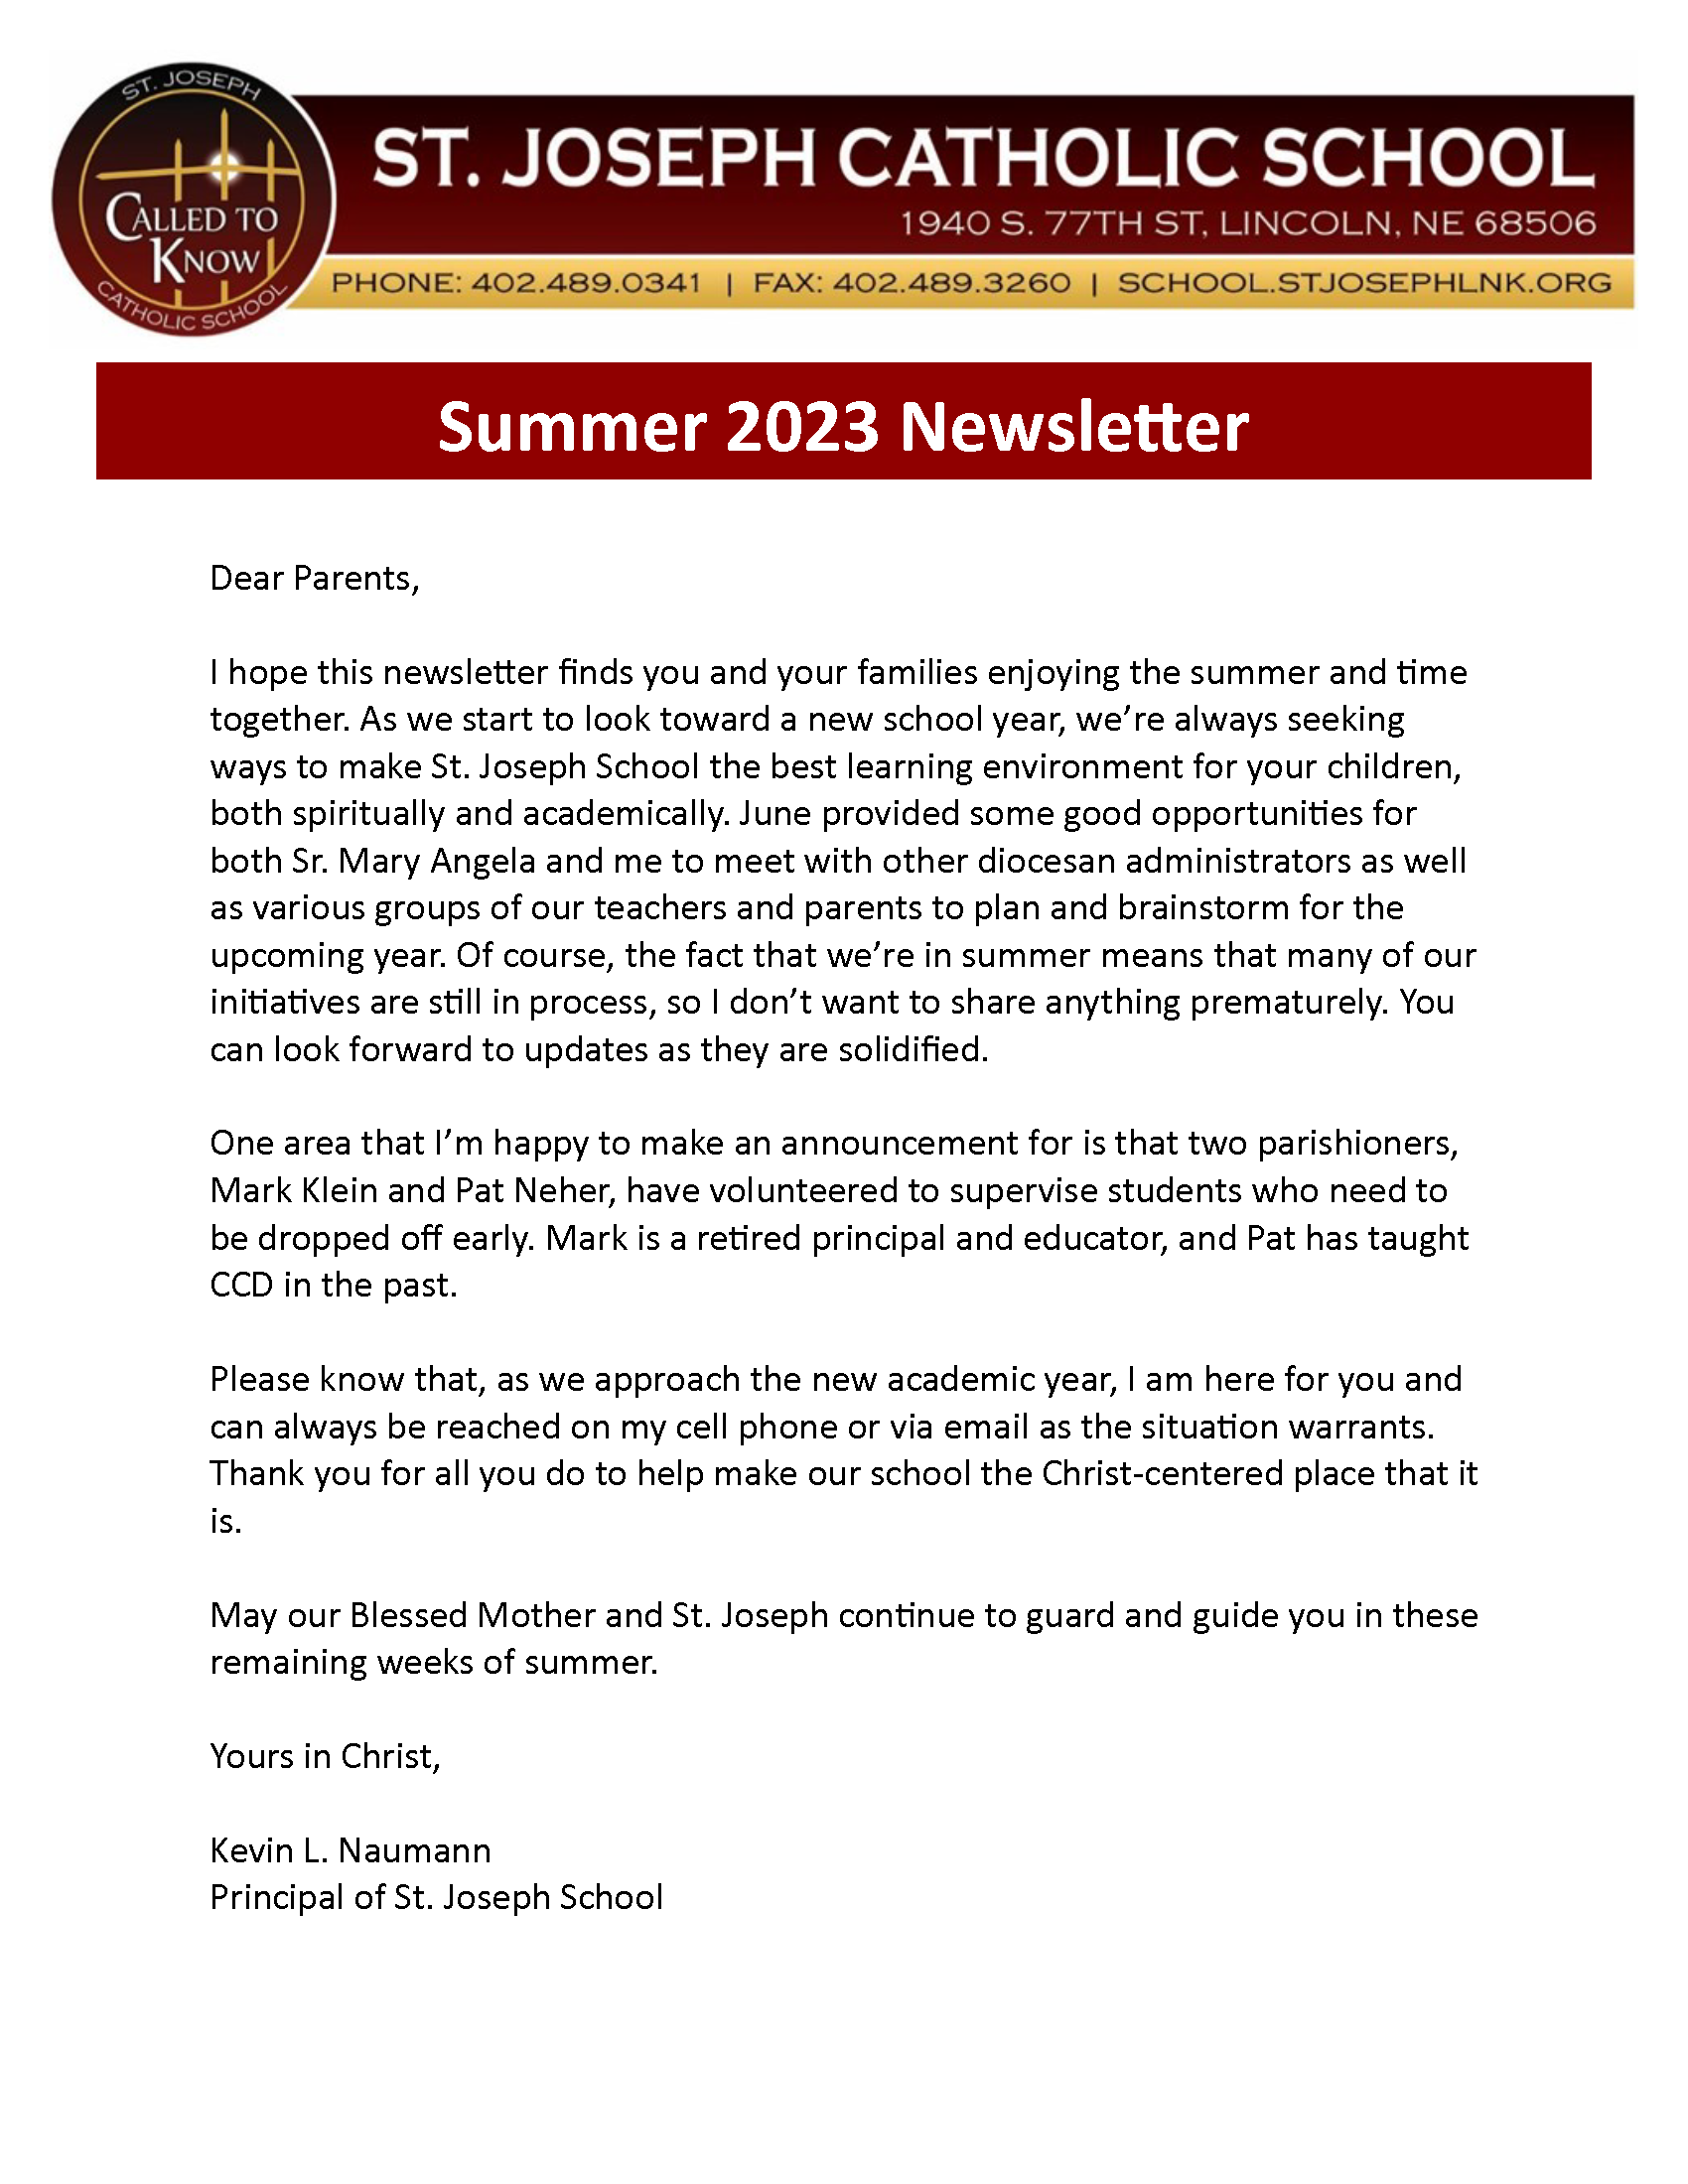 Summer email 2023 Page 1